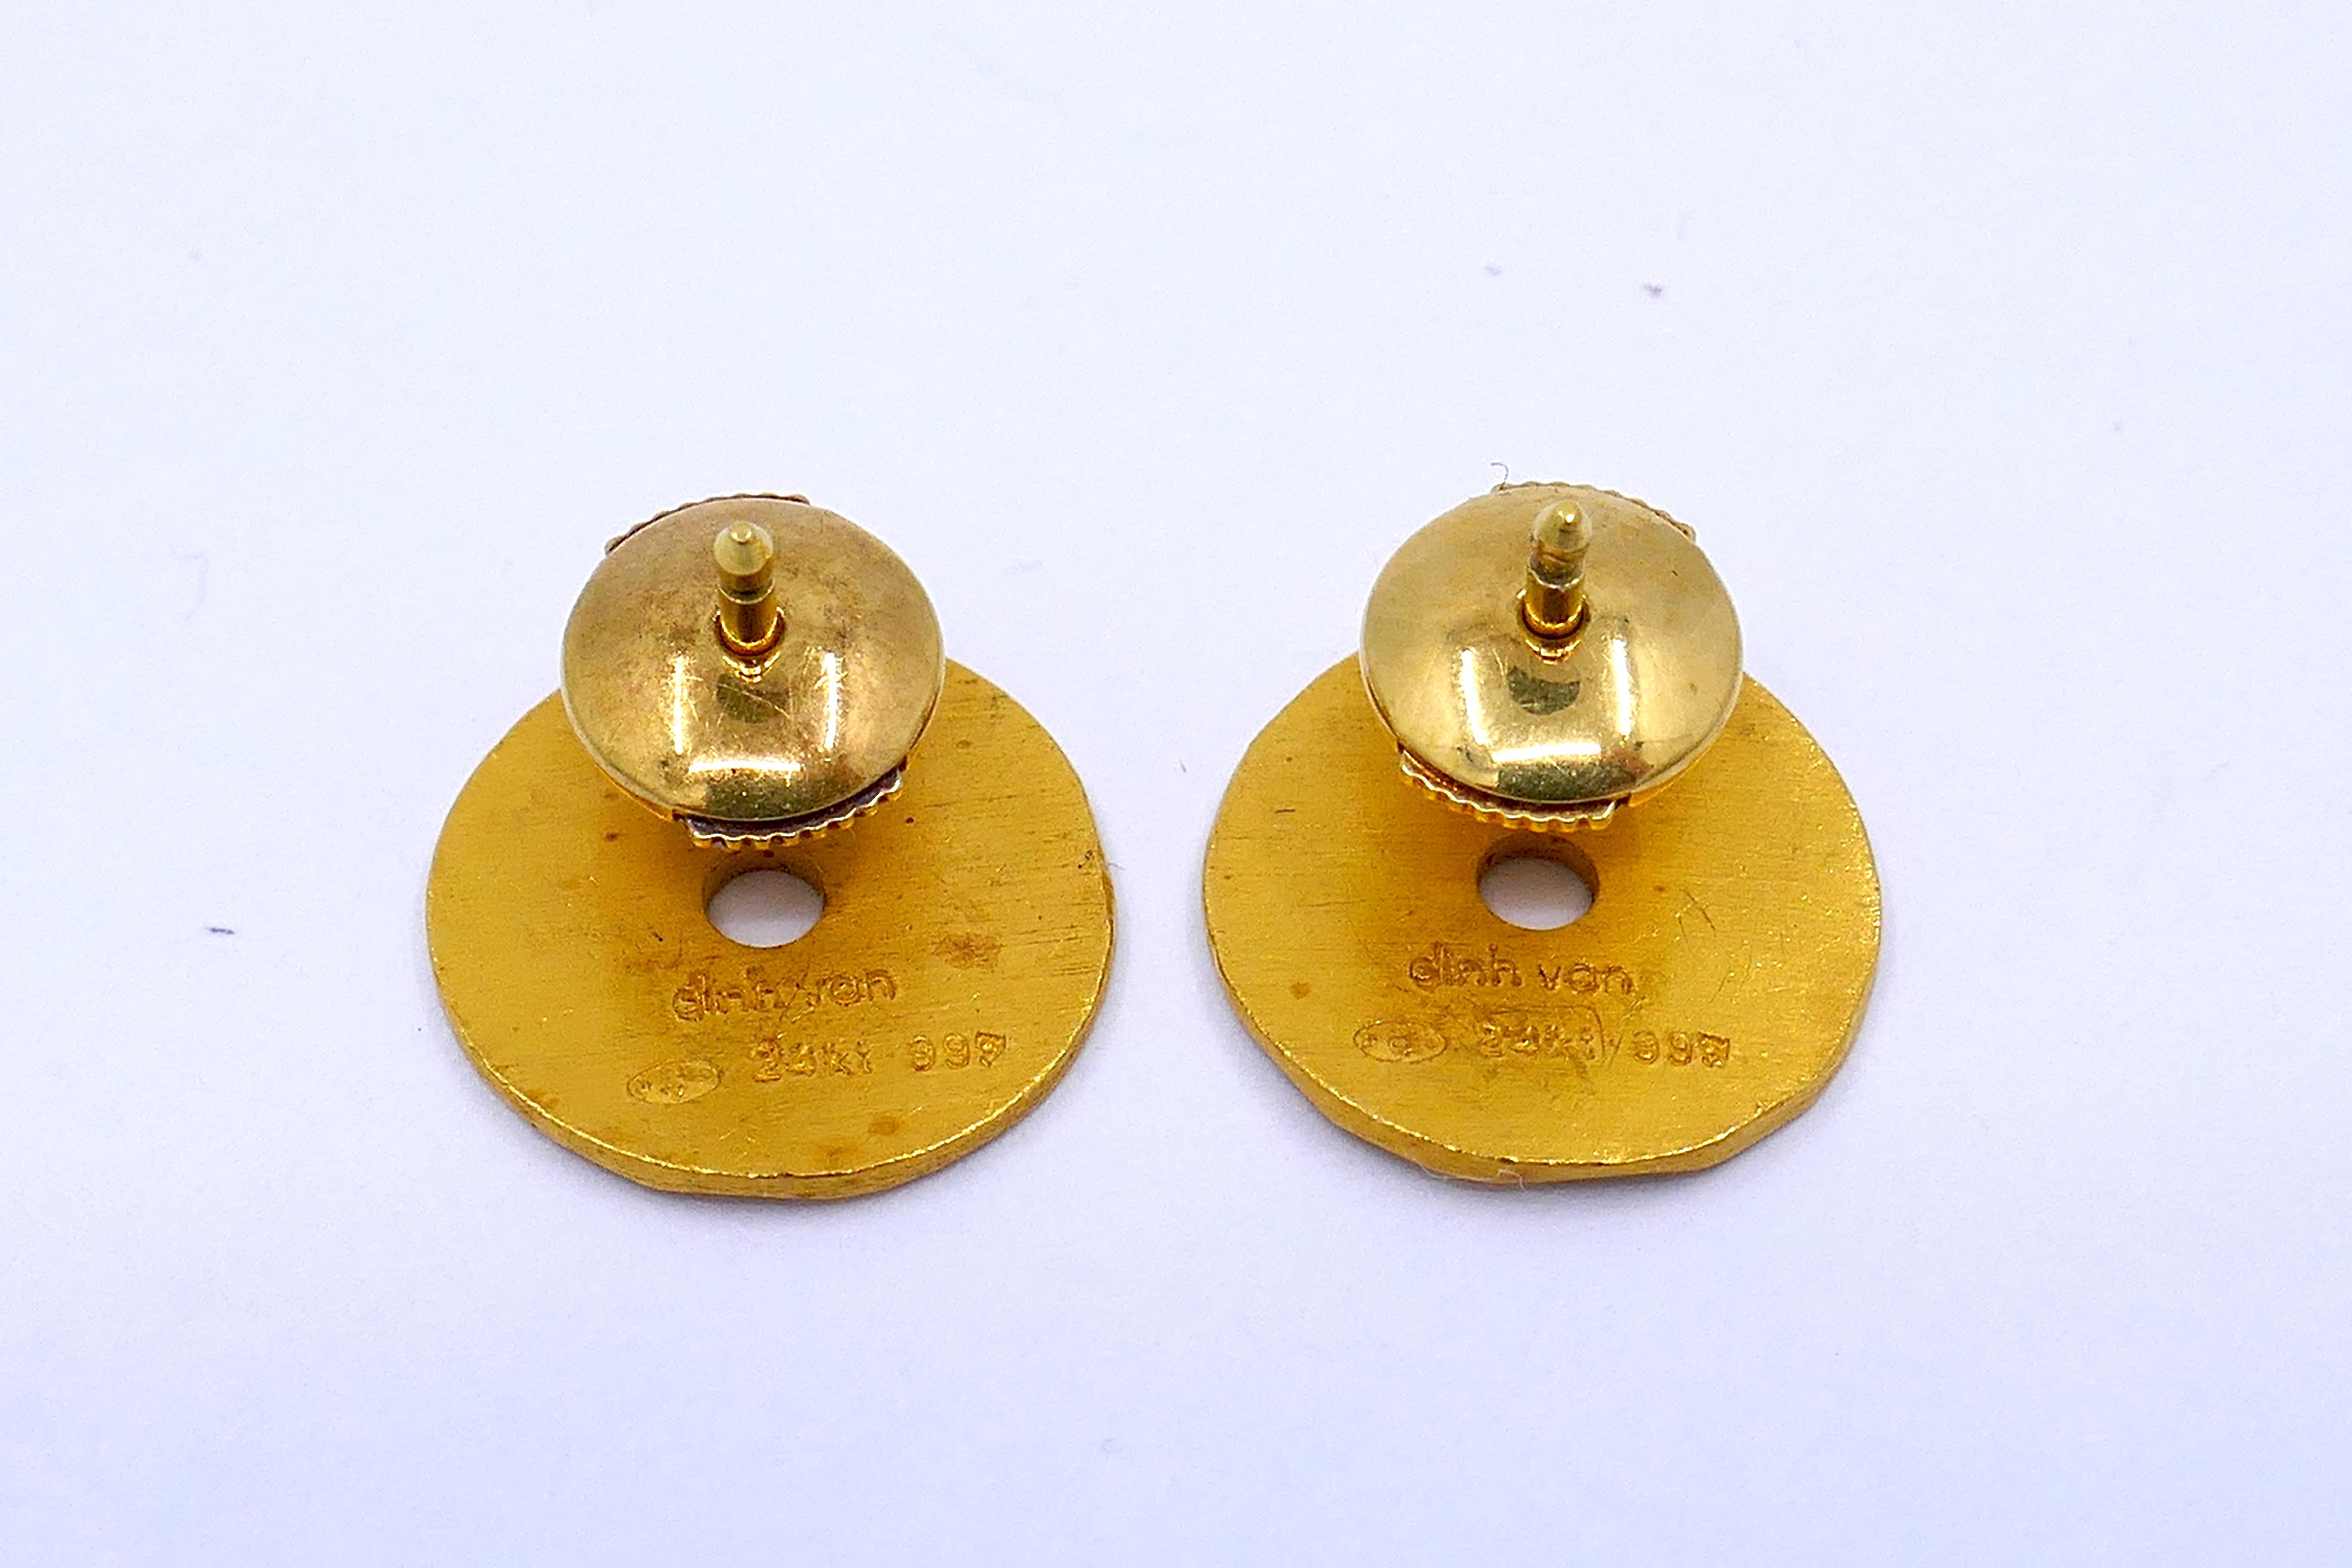 These stud earrings by Jean Dinh Van epitomize elegance and craftsmanship. Crafted from 24k hammered gold, they are designed for pierced ears. The .5